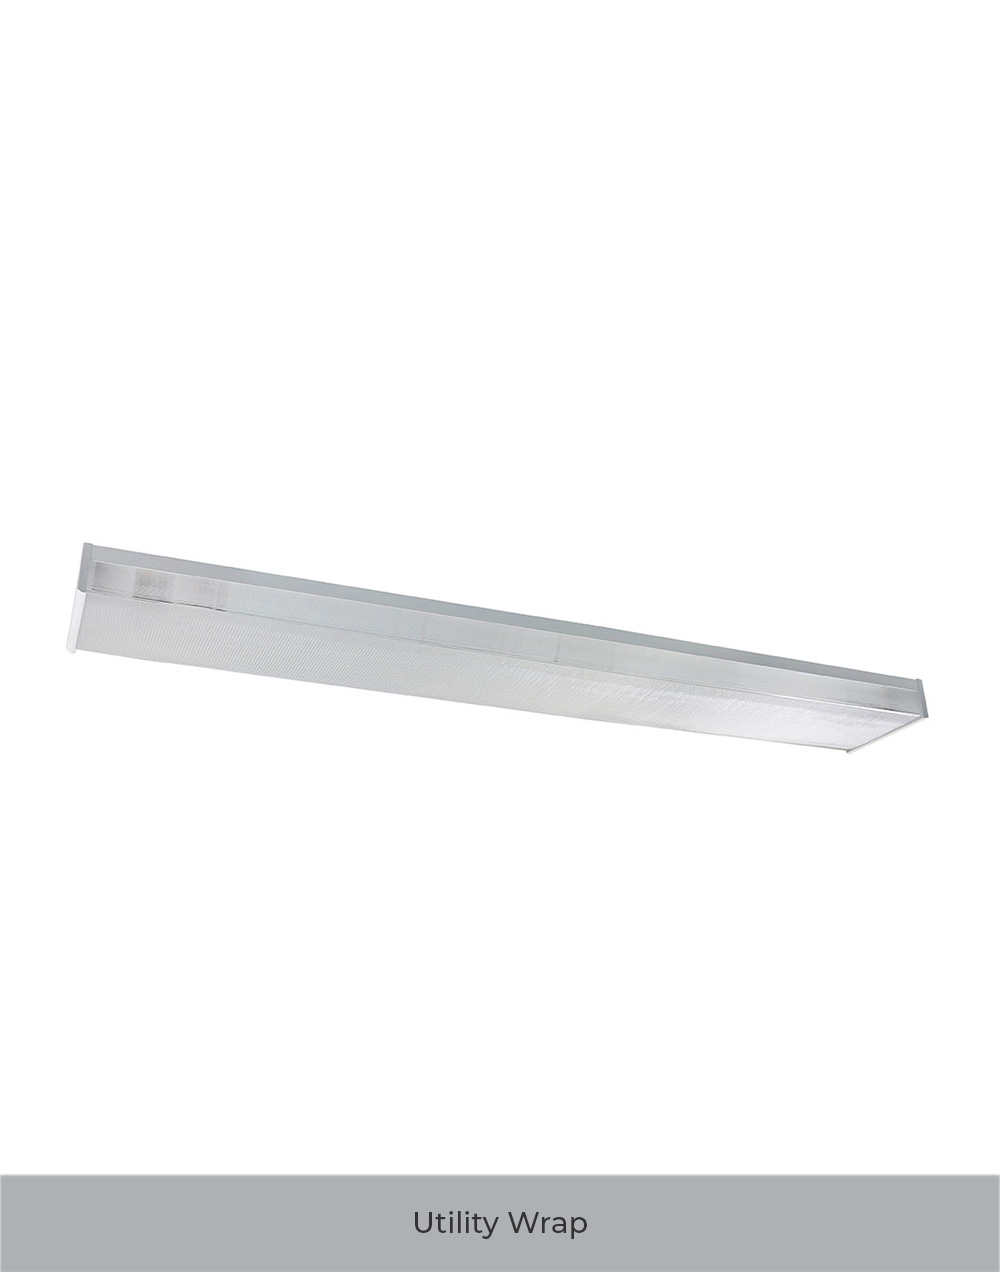 naturaLED Linear Utility Wrap Lighting